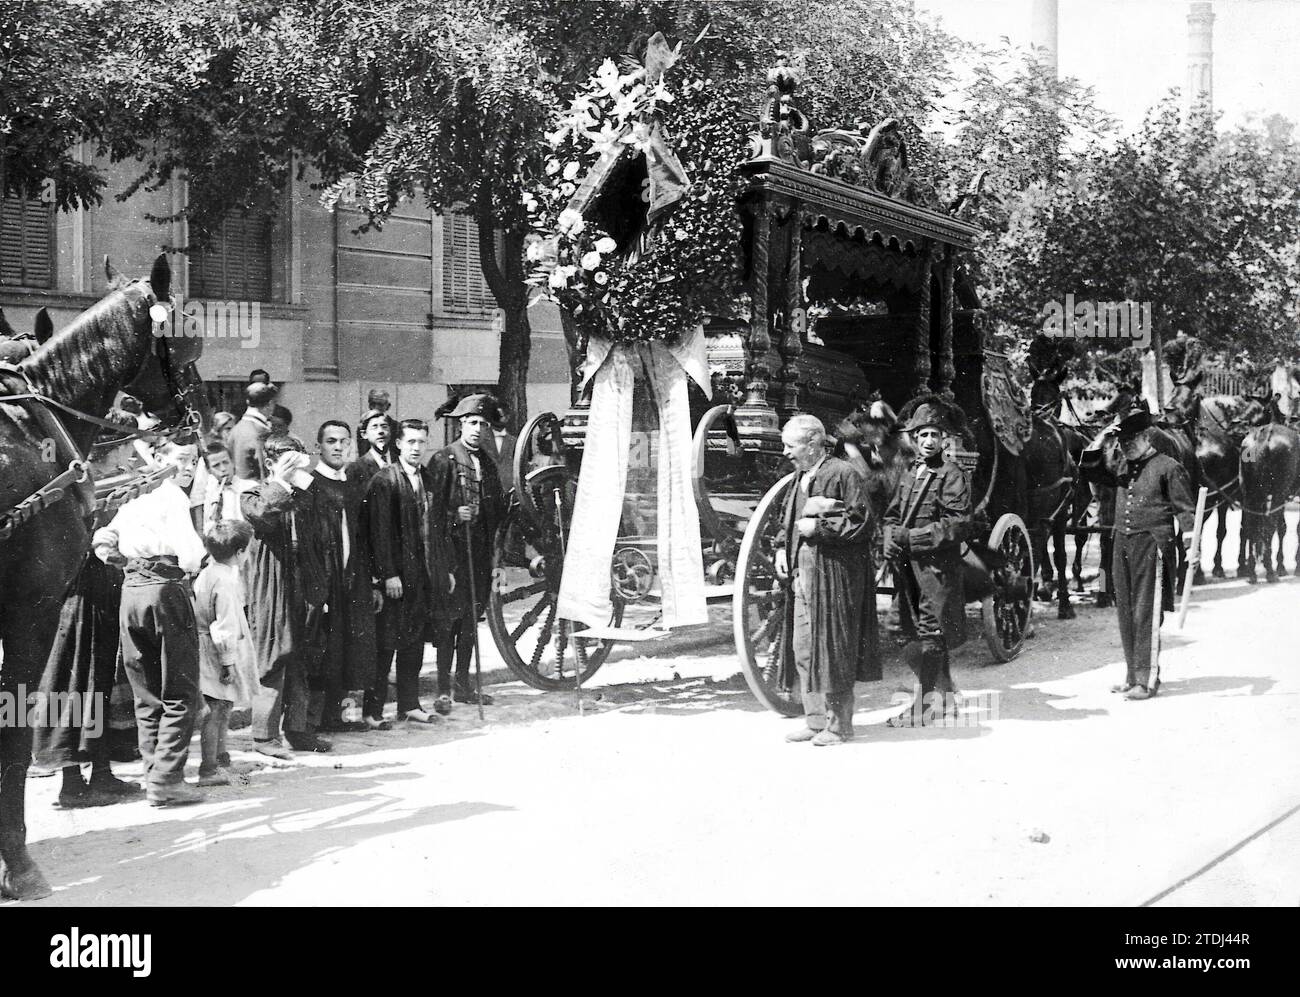 06/30/1920. Madrid. Burial of an Insigne painter. The hearse that carried the remains of the distinguished artist Don Francisco Domingo Márquez, when the procession began its march. Credit: Album / Archivo ABC / Julio Duque Stock Photo